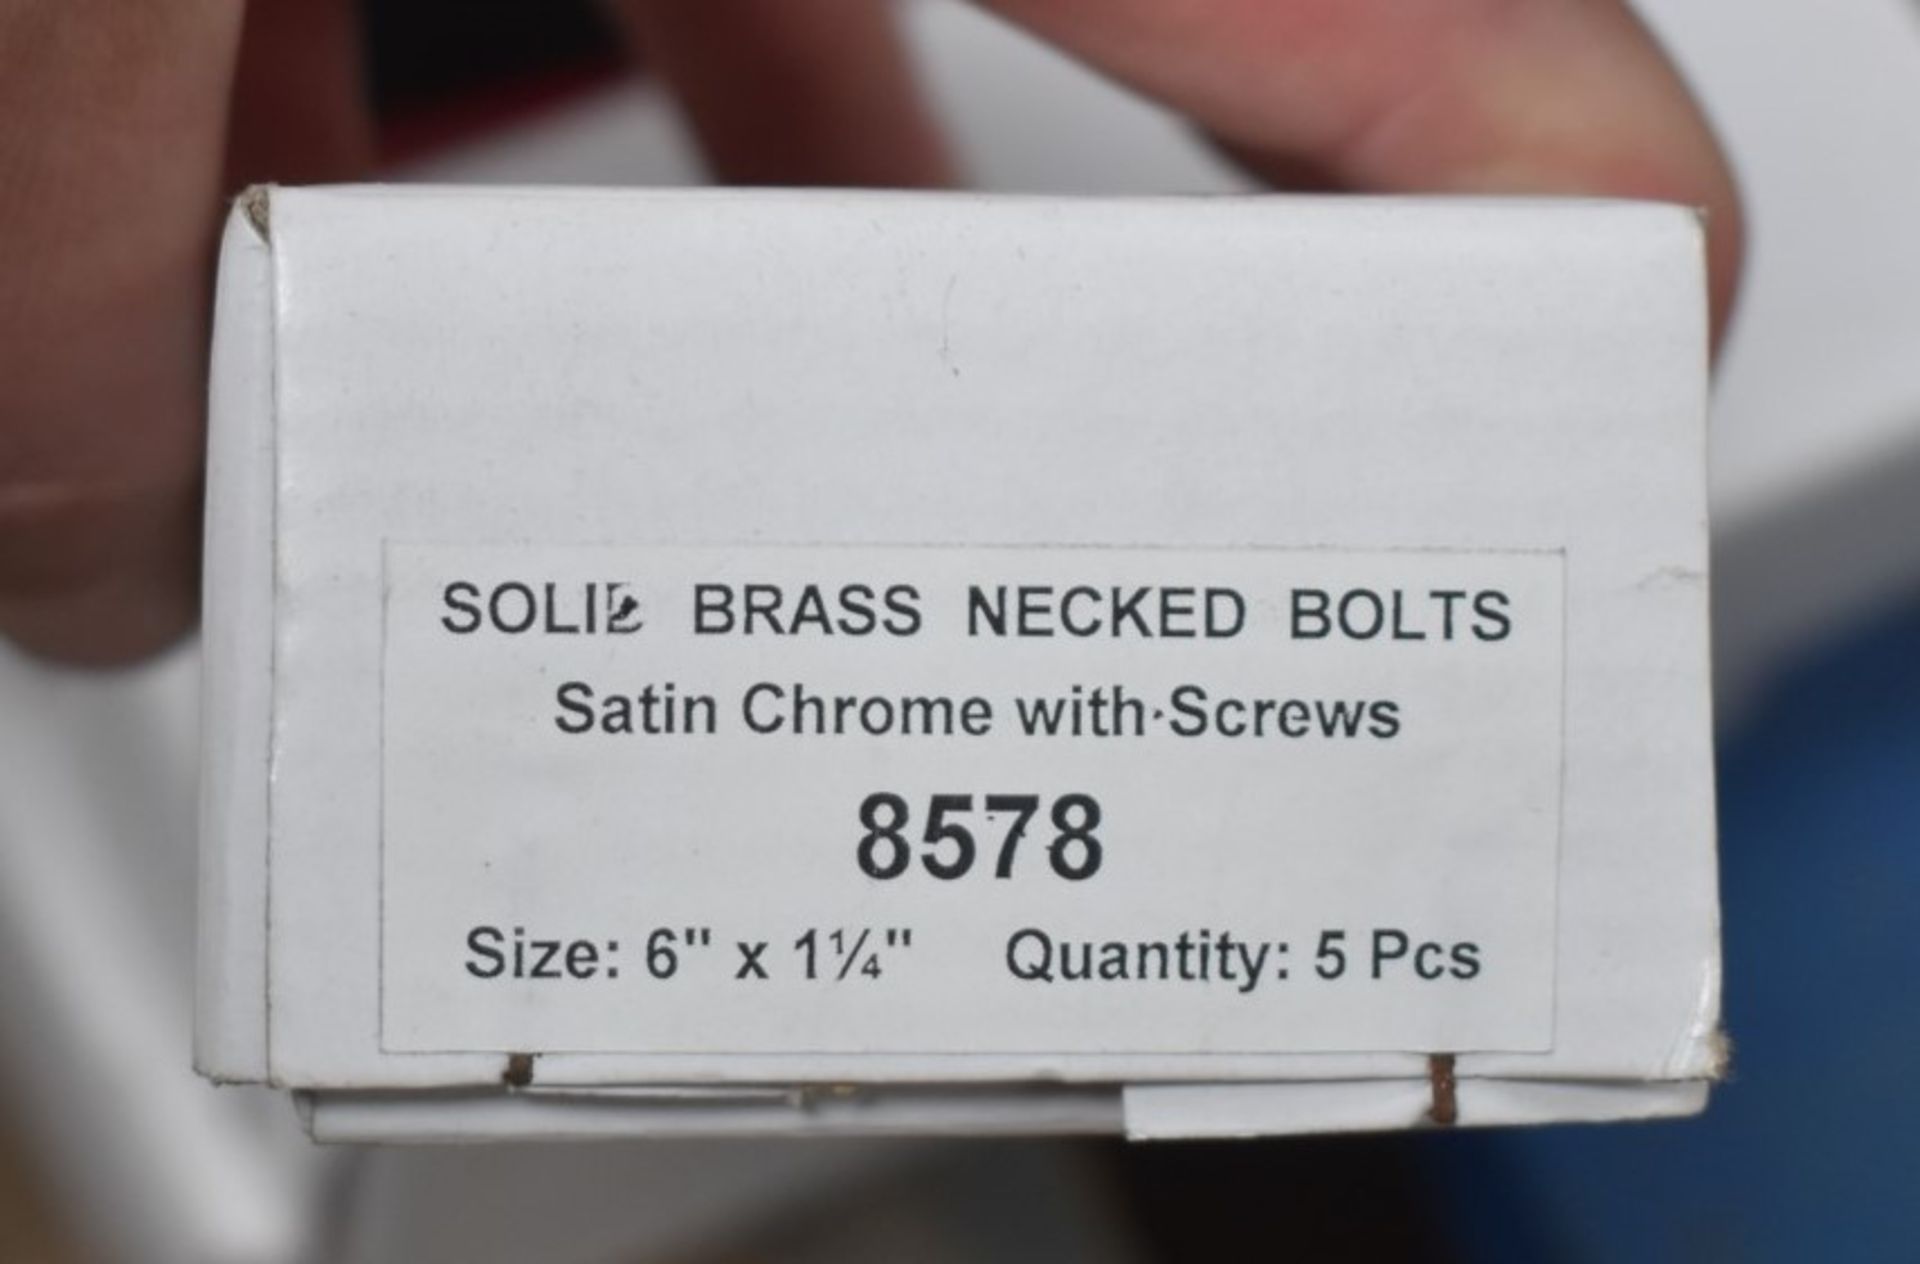 20 x Solid Brass Necked Bolts - Satin Chrome Finish With Screws - Size 6" x 1 1/4" - Brand New Stock - Image 2 of 4